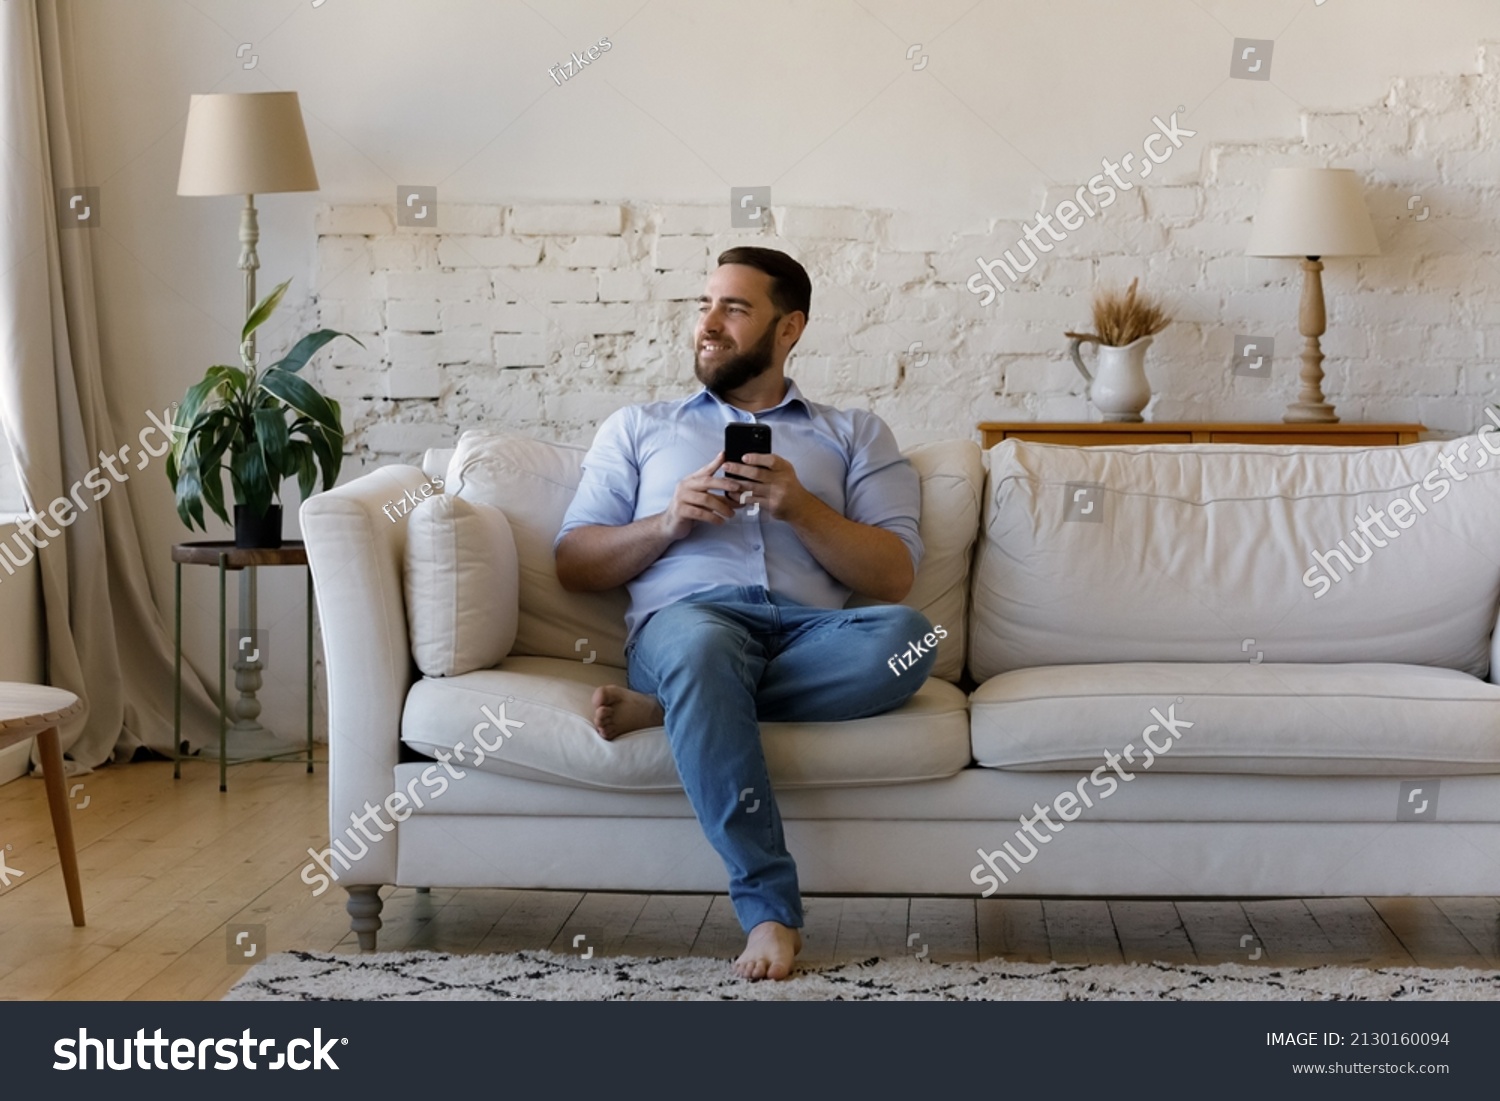 Smiling man sit on sofa at home with smartphone distracted from device look into distance spend weekend using modern cellphone, single guy enjoy e-dating services. Wireless tech, fun, leisure concept #2130160094